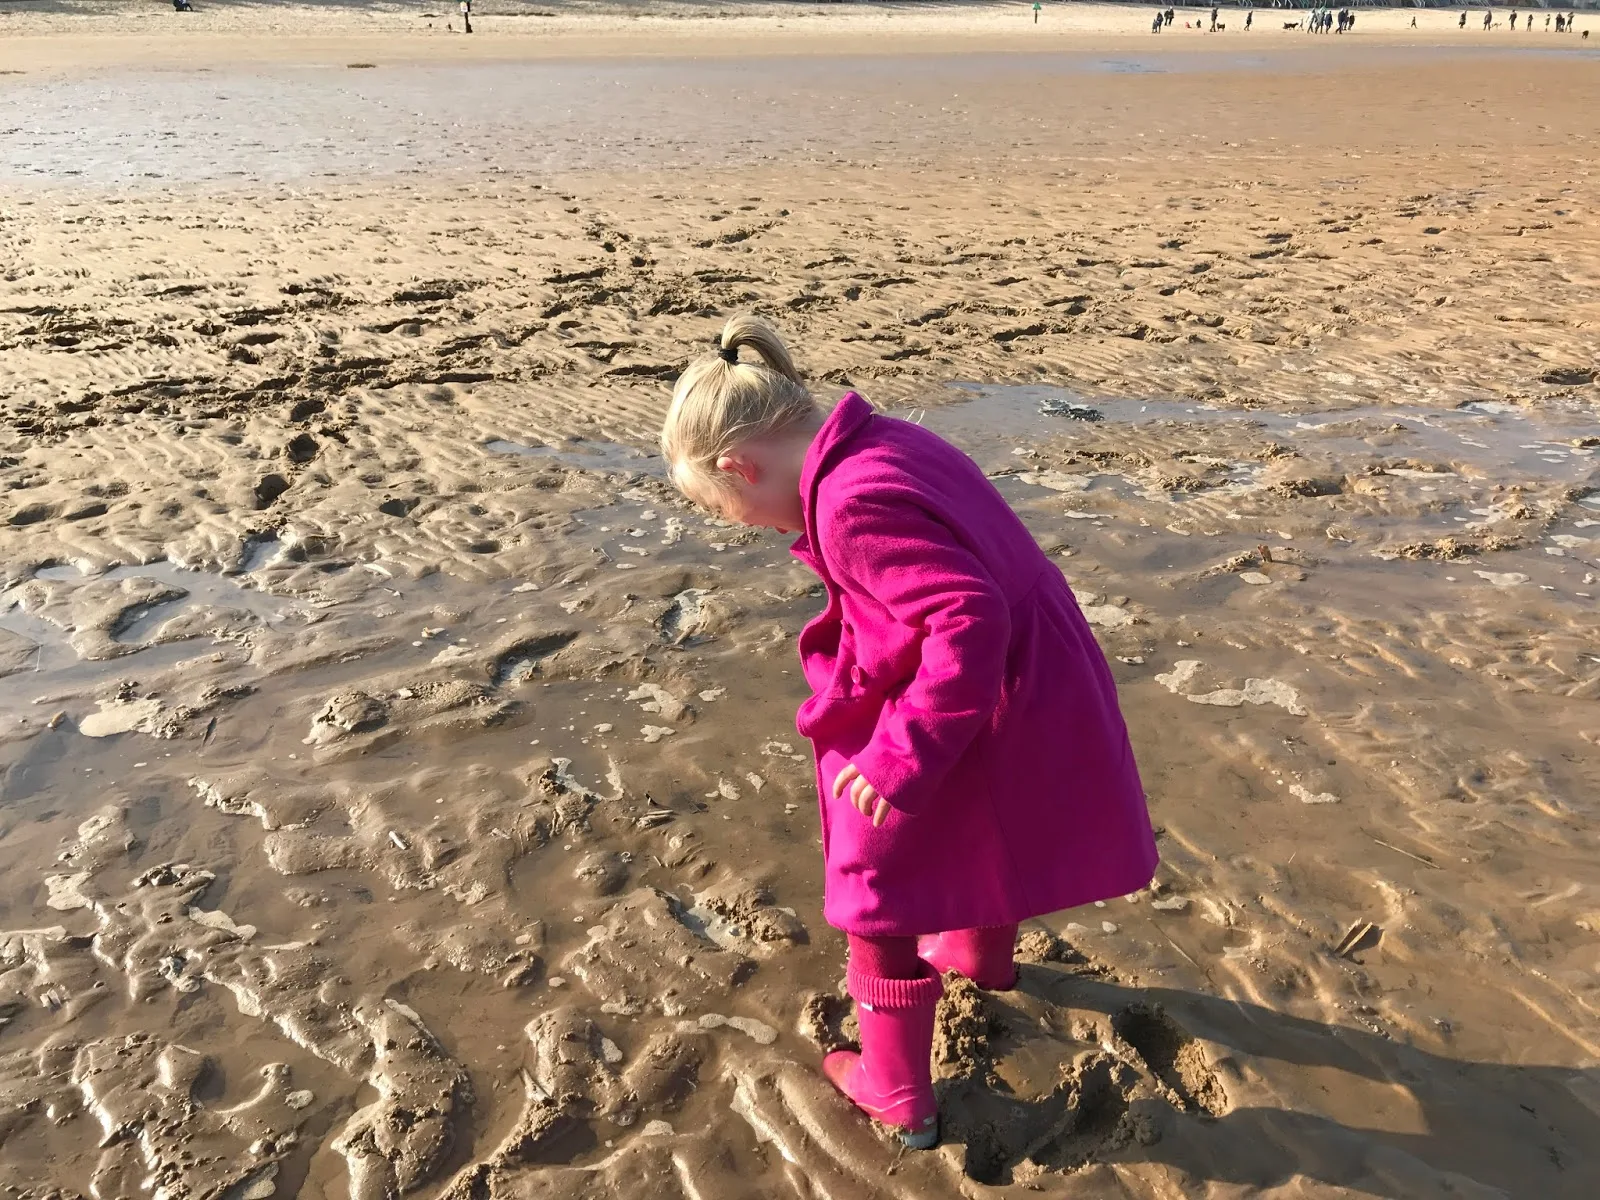 A 5 year old girl all dressed in pink looks down at her pink wellies as her feet sink in wet sand